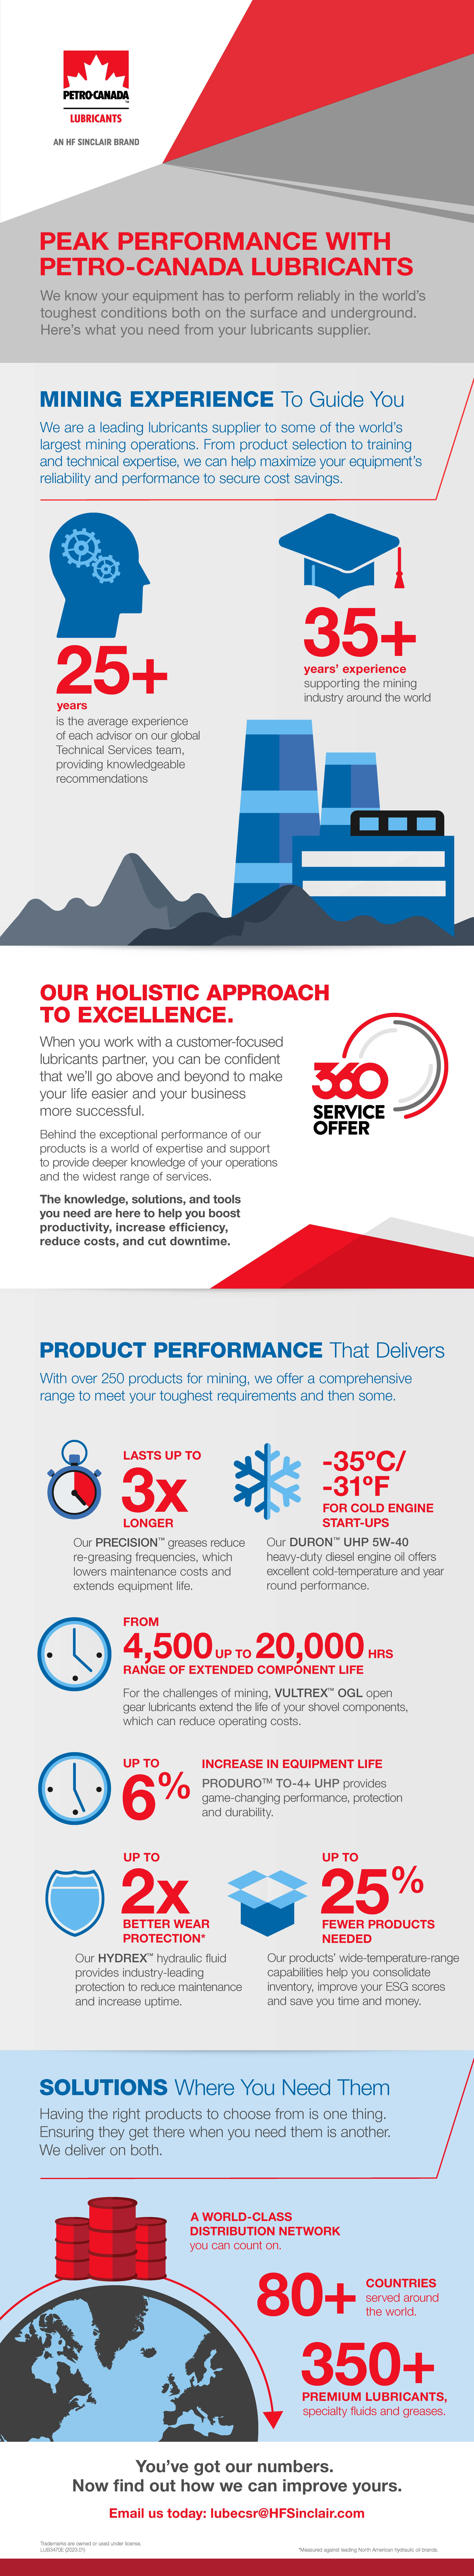 Infographic about choosing the right mining lubricant supplier with Petro-Canada Lubricants